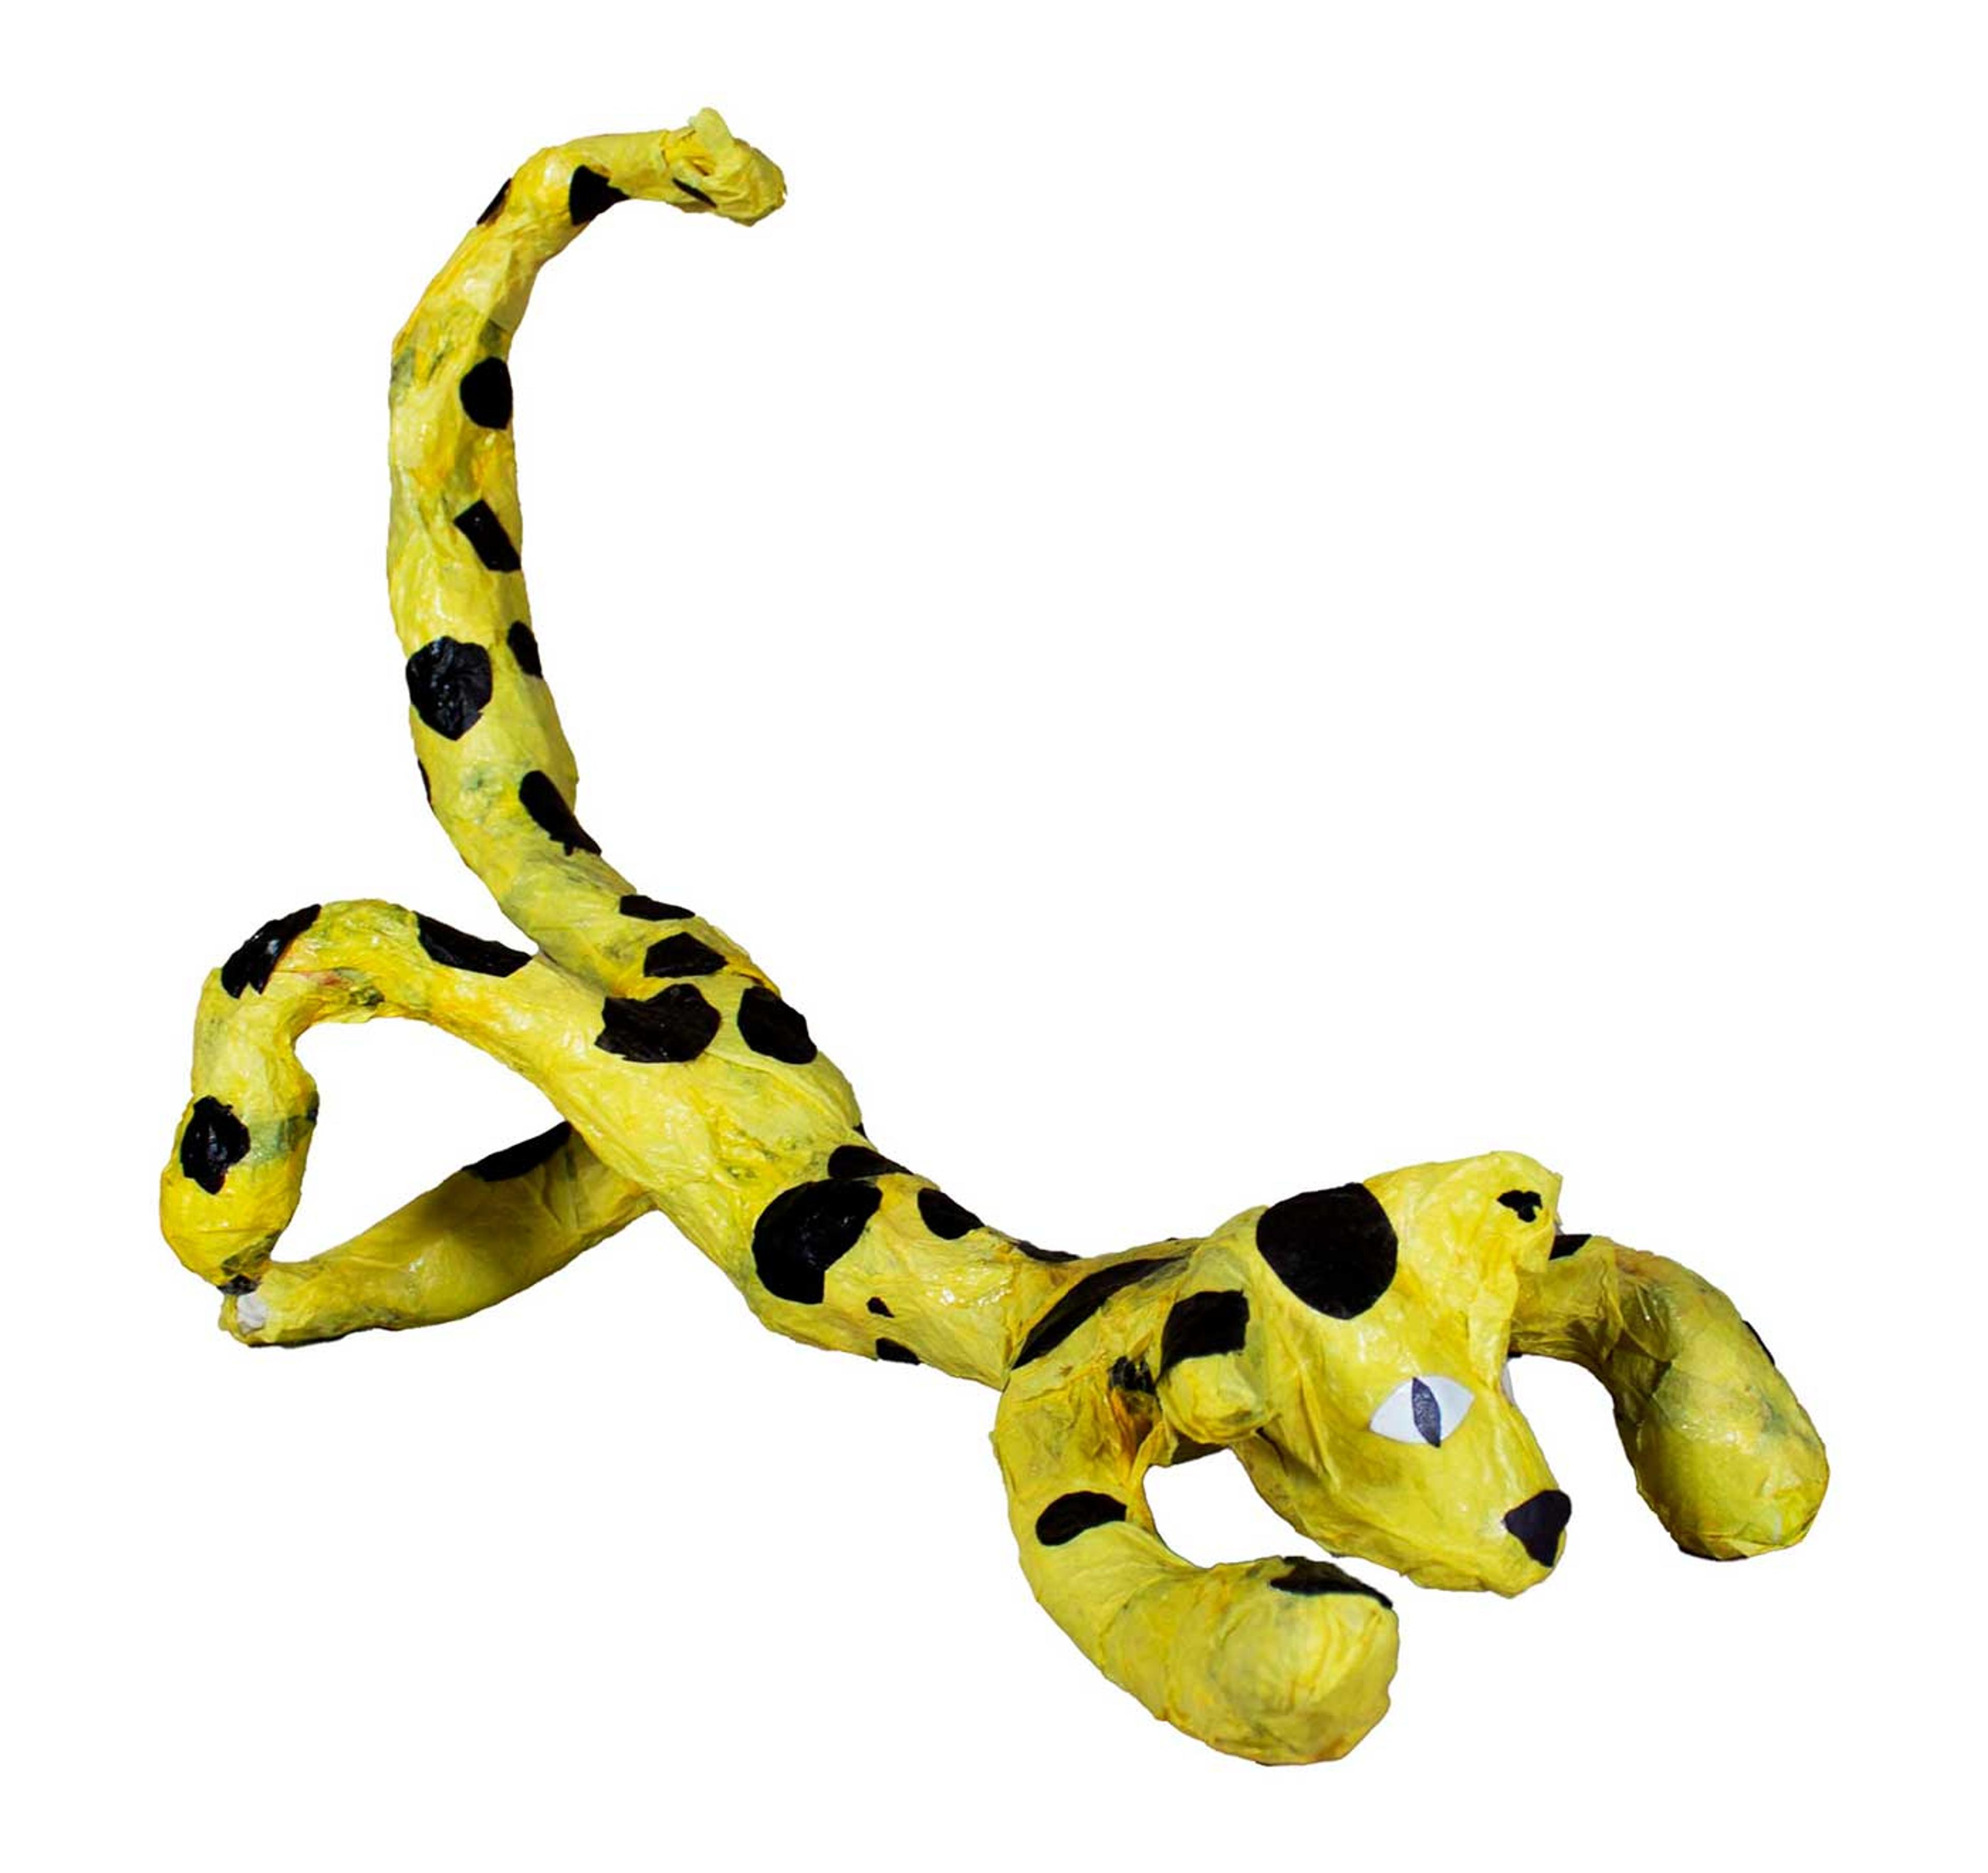 Mixed-media sculpture of a yellow cheetah with brown spots.